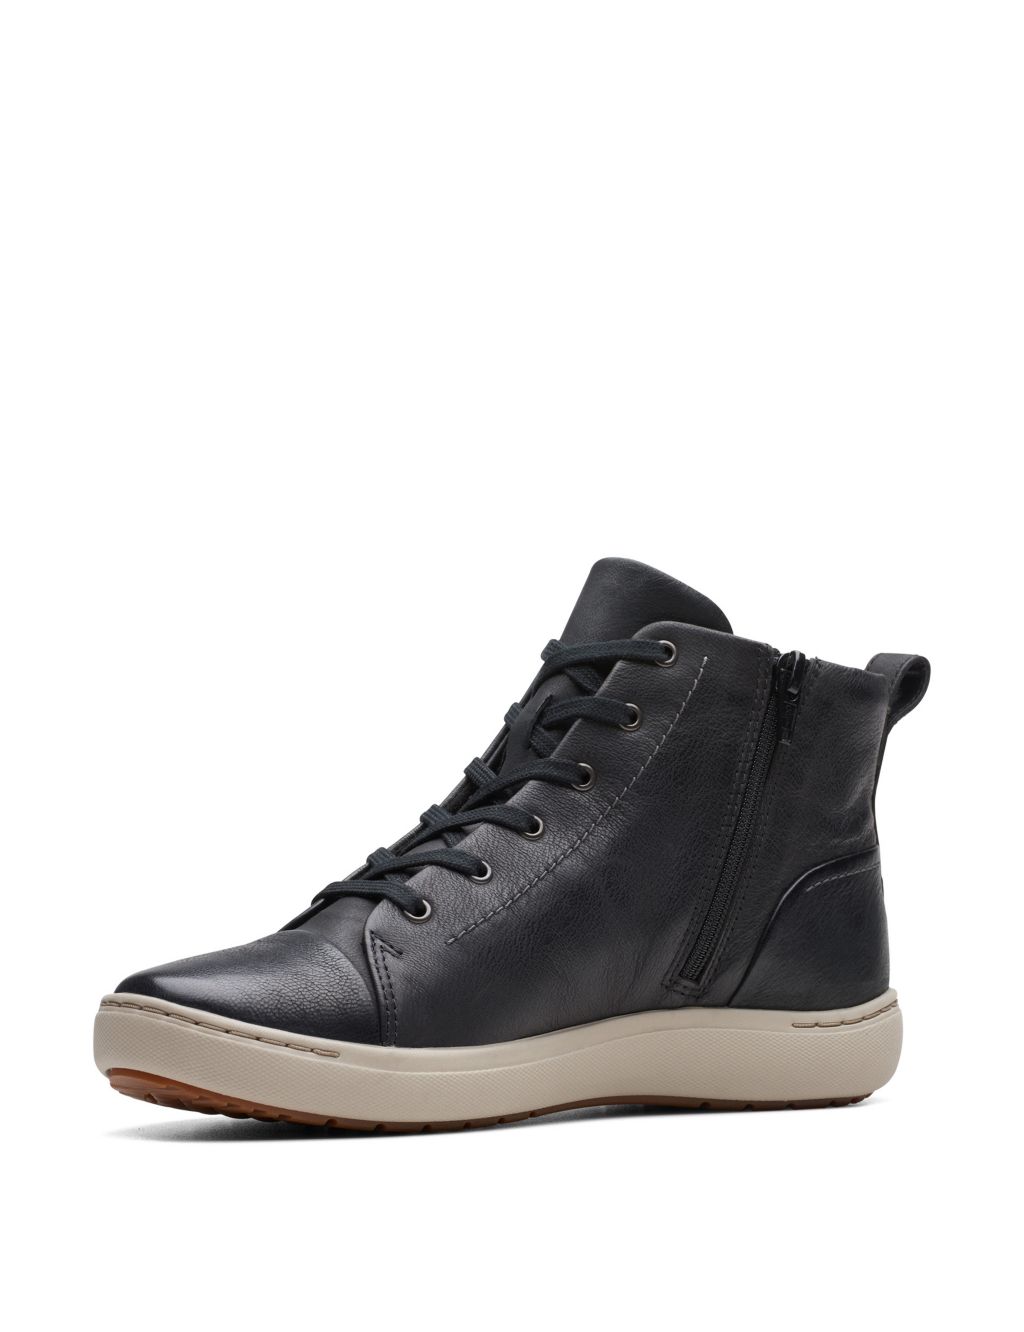 Leather Lace Up High Top Trainers image 4